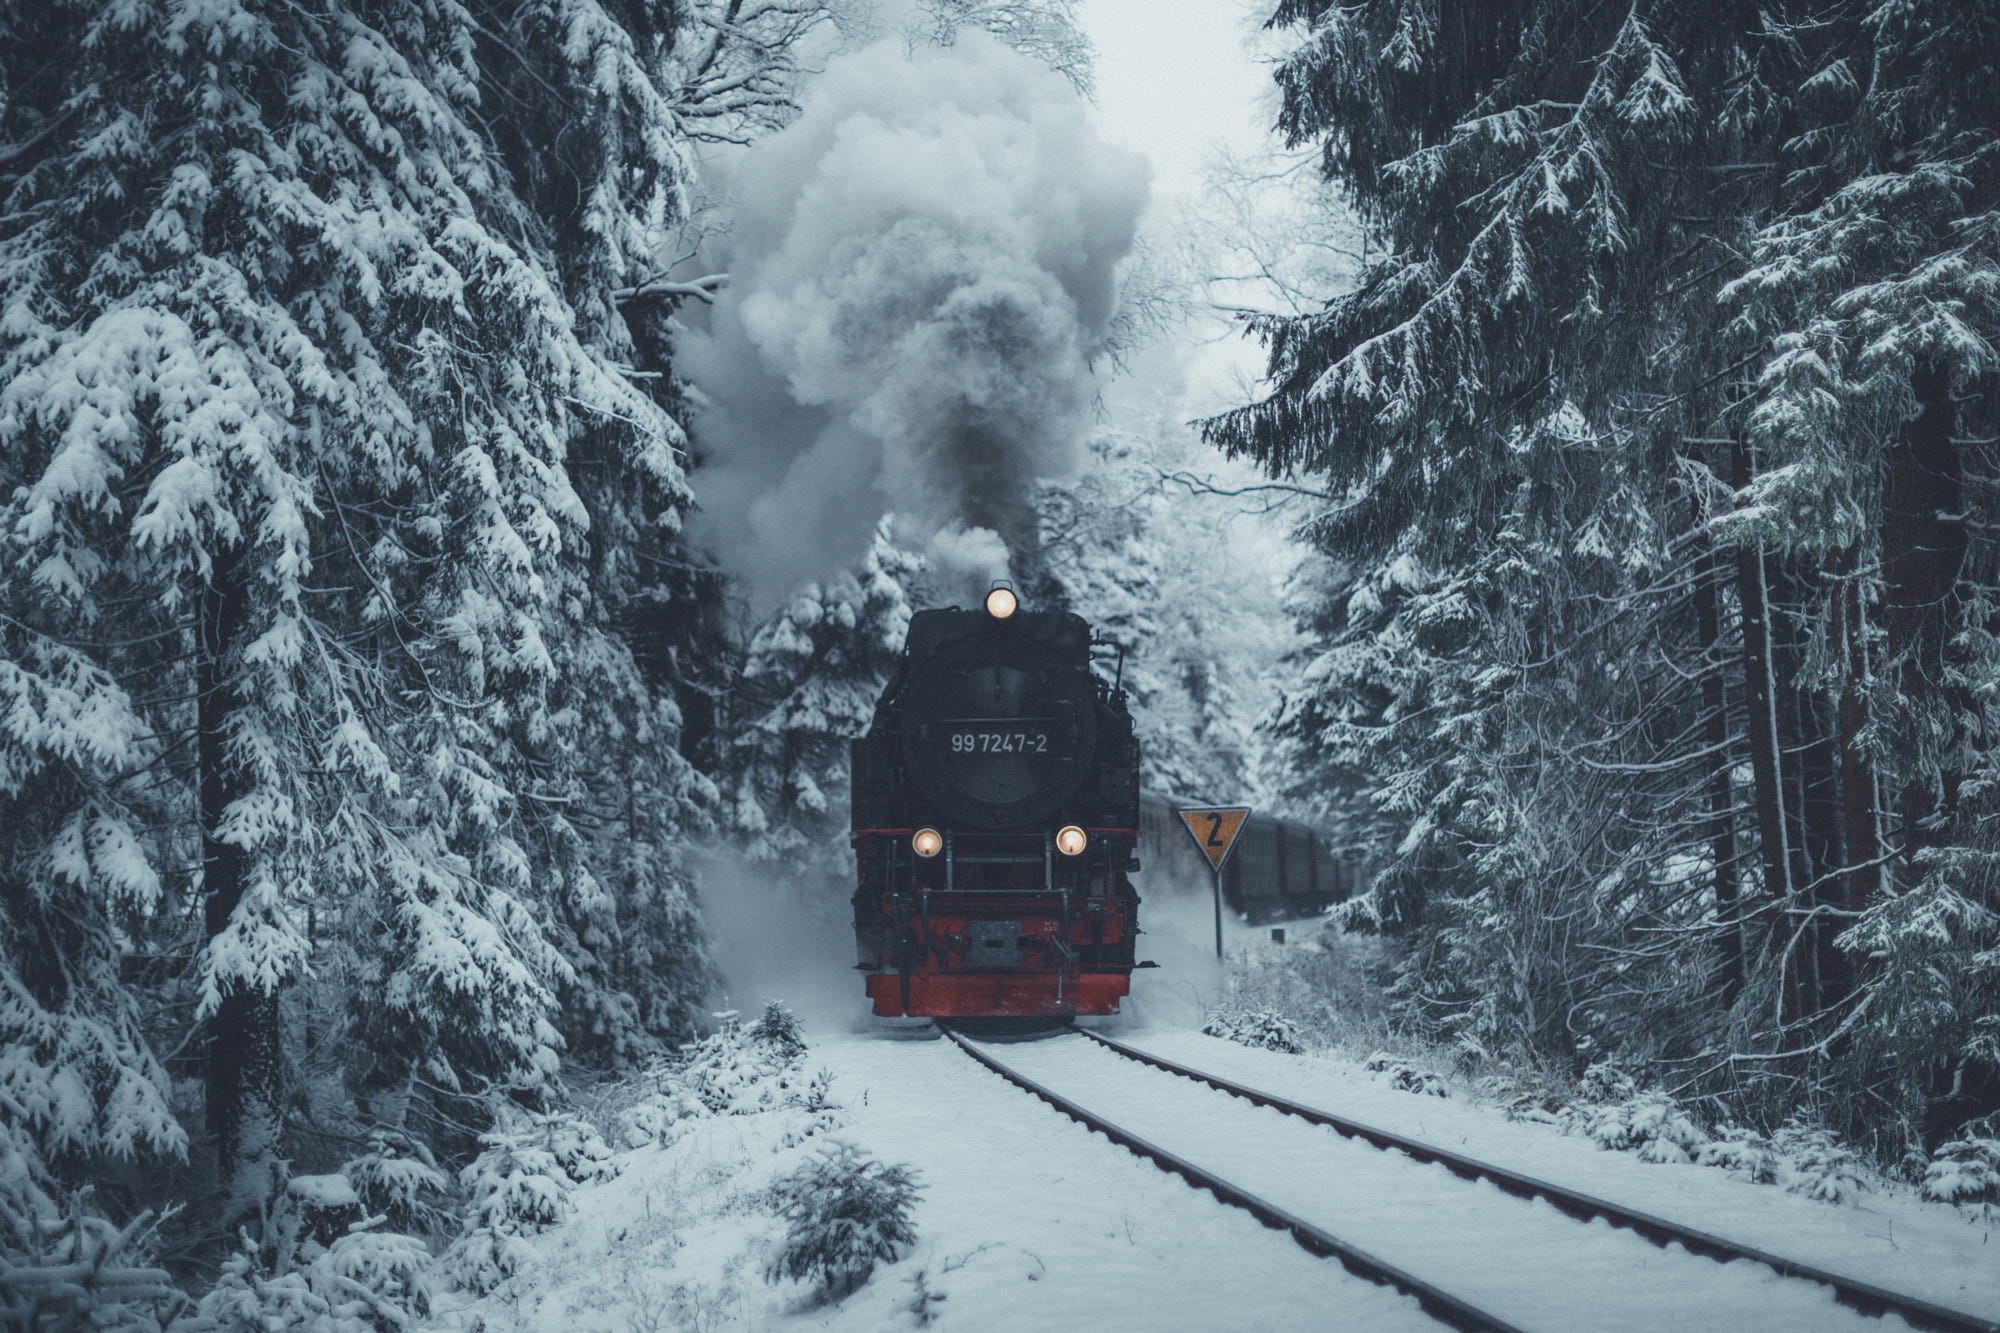 General 2000x1333 nature winter railway trees train snow spruce forest vehicle numbers frontal view